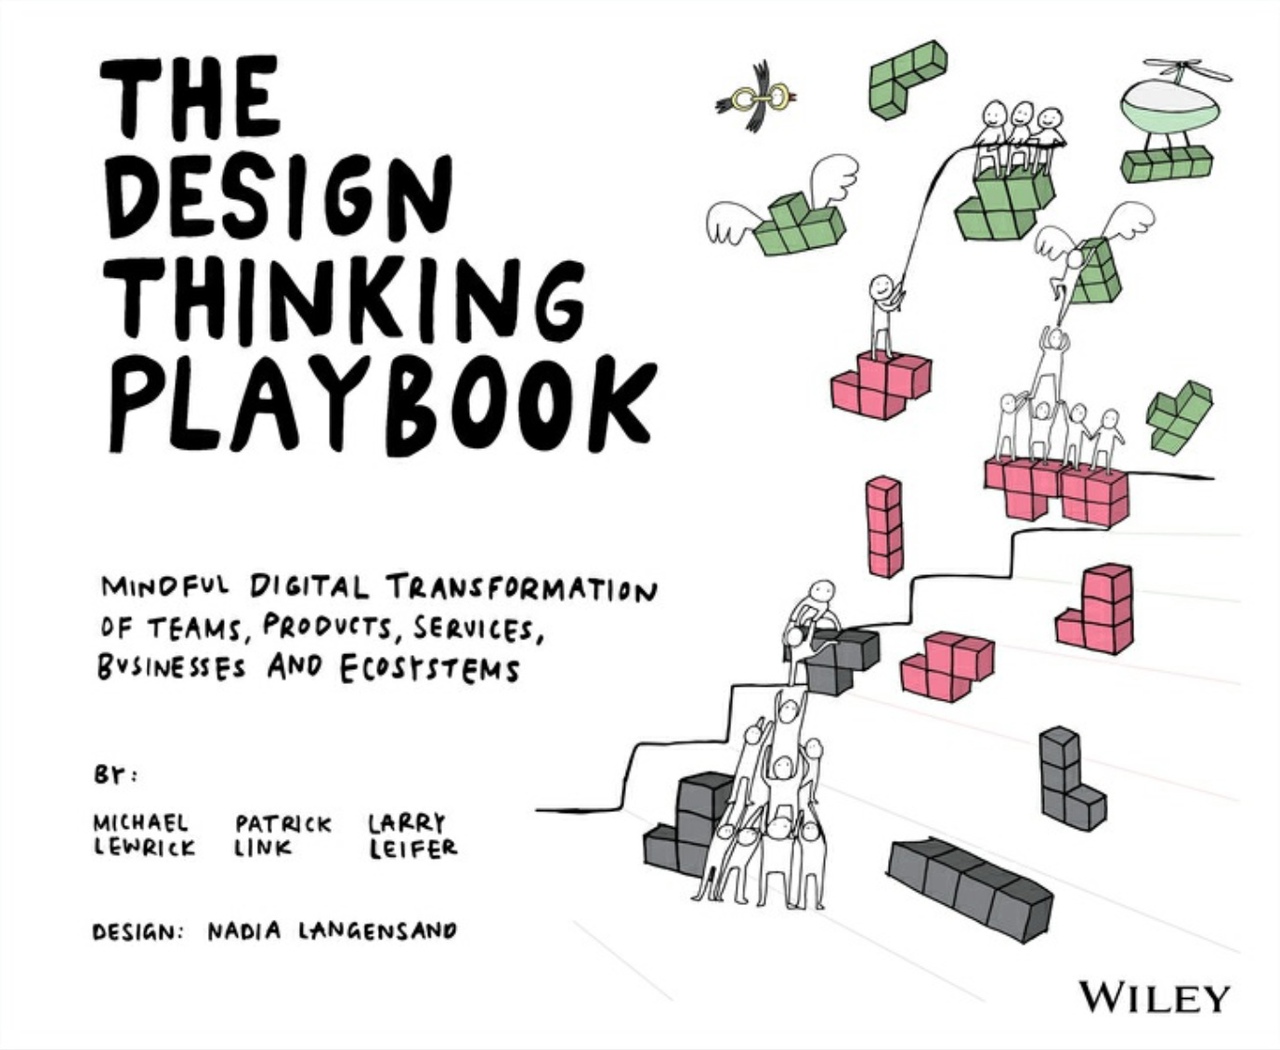 The Design Thinking Playbook Mindful Digital Transformation Of Teams, Products, Services, Businesses And Ecosystems By Michael Lewrick